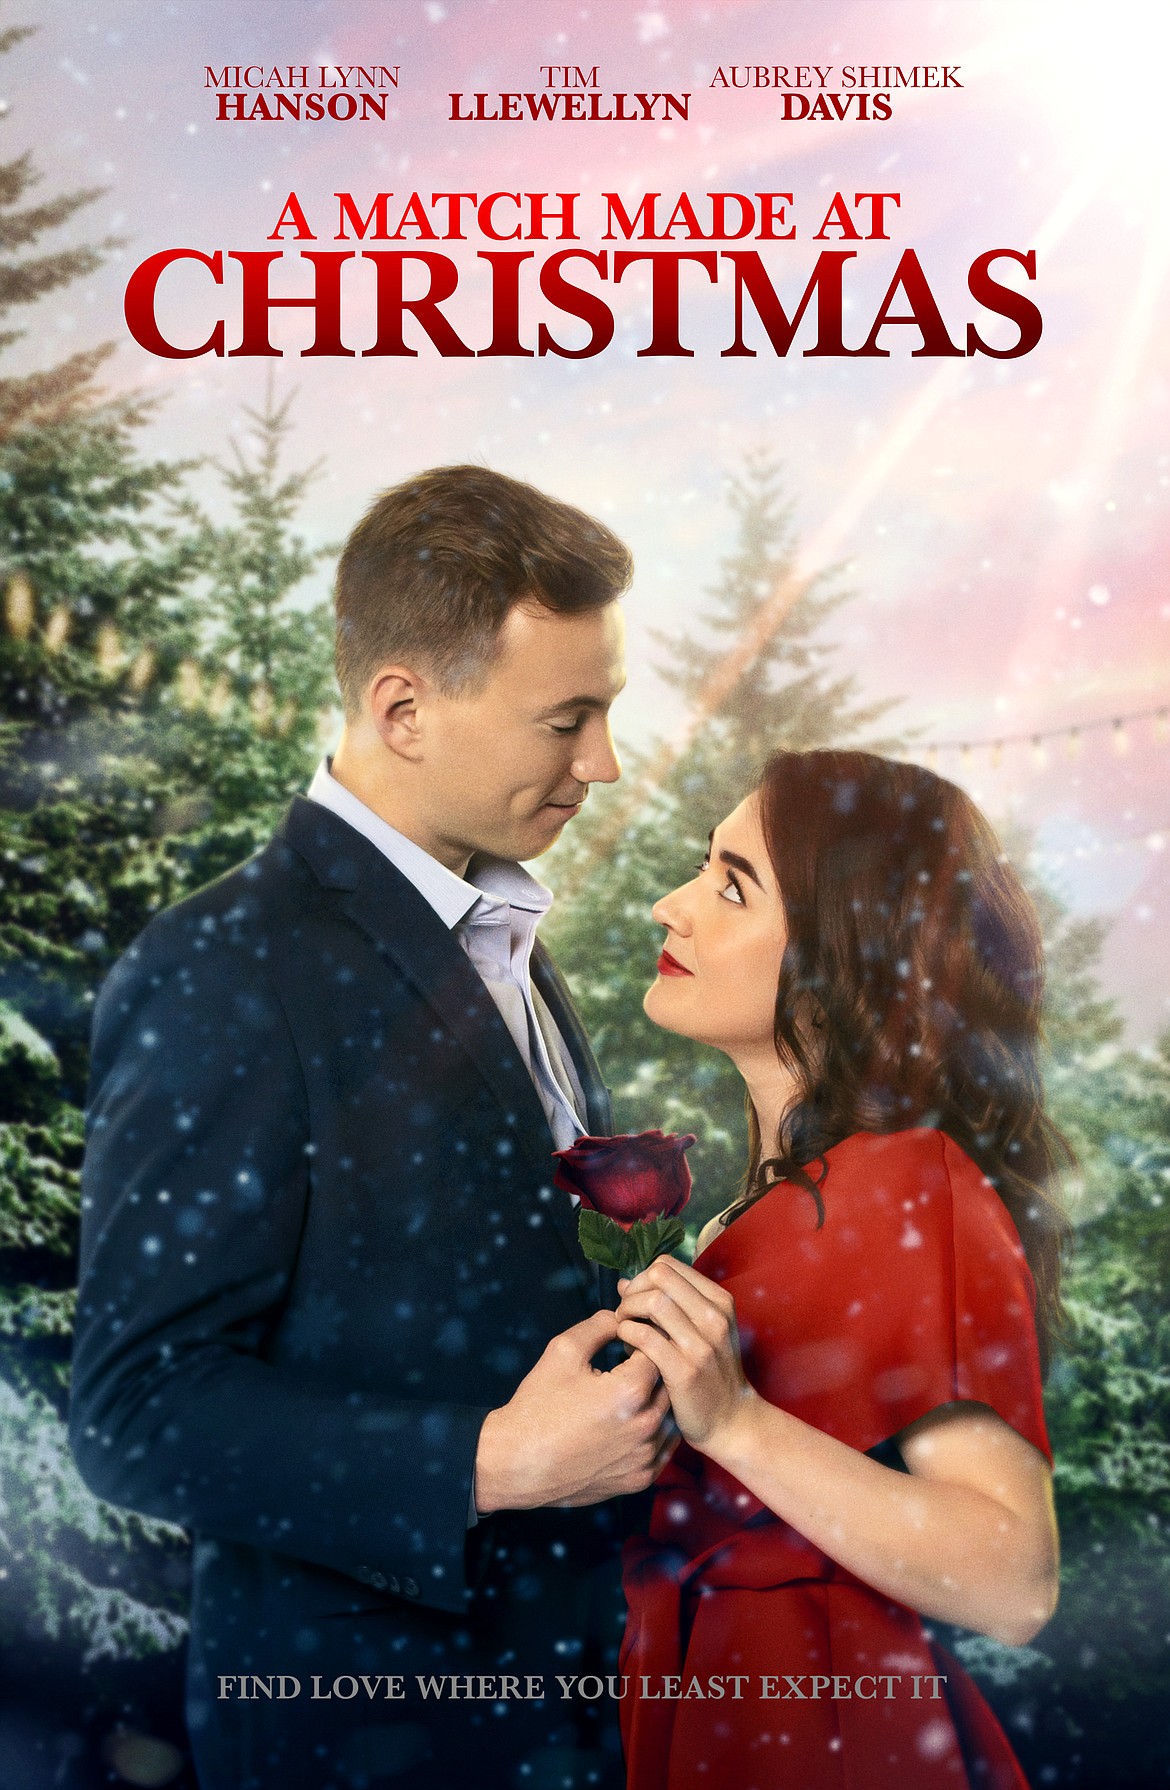 Locally filmed and produced holiday romantic comedy, "A Match Made at Christmas," will show at the Hayden Cinema on Monday and Dec. 8 at 7 p.m for a special premier-screening. Image courtesy of Abundant House Films